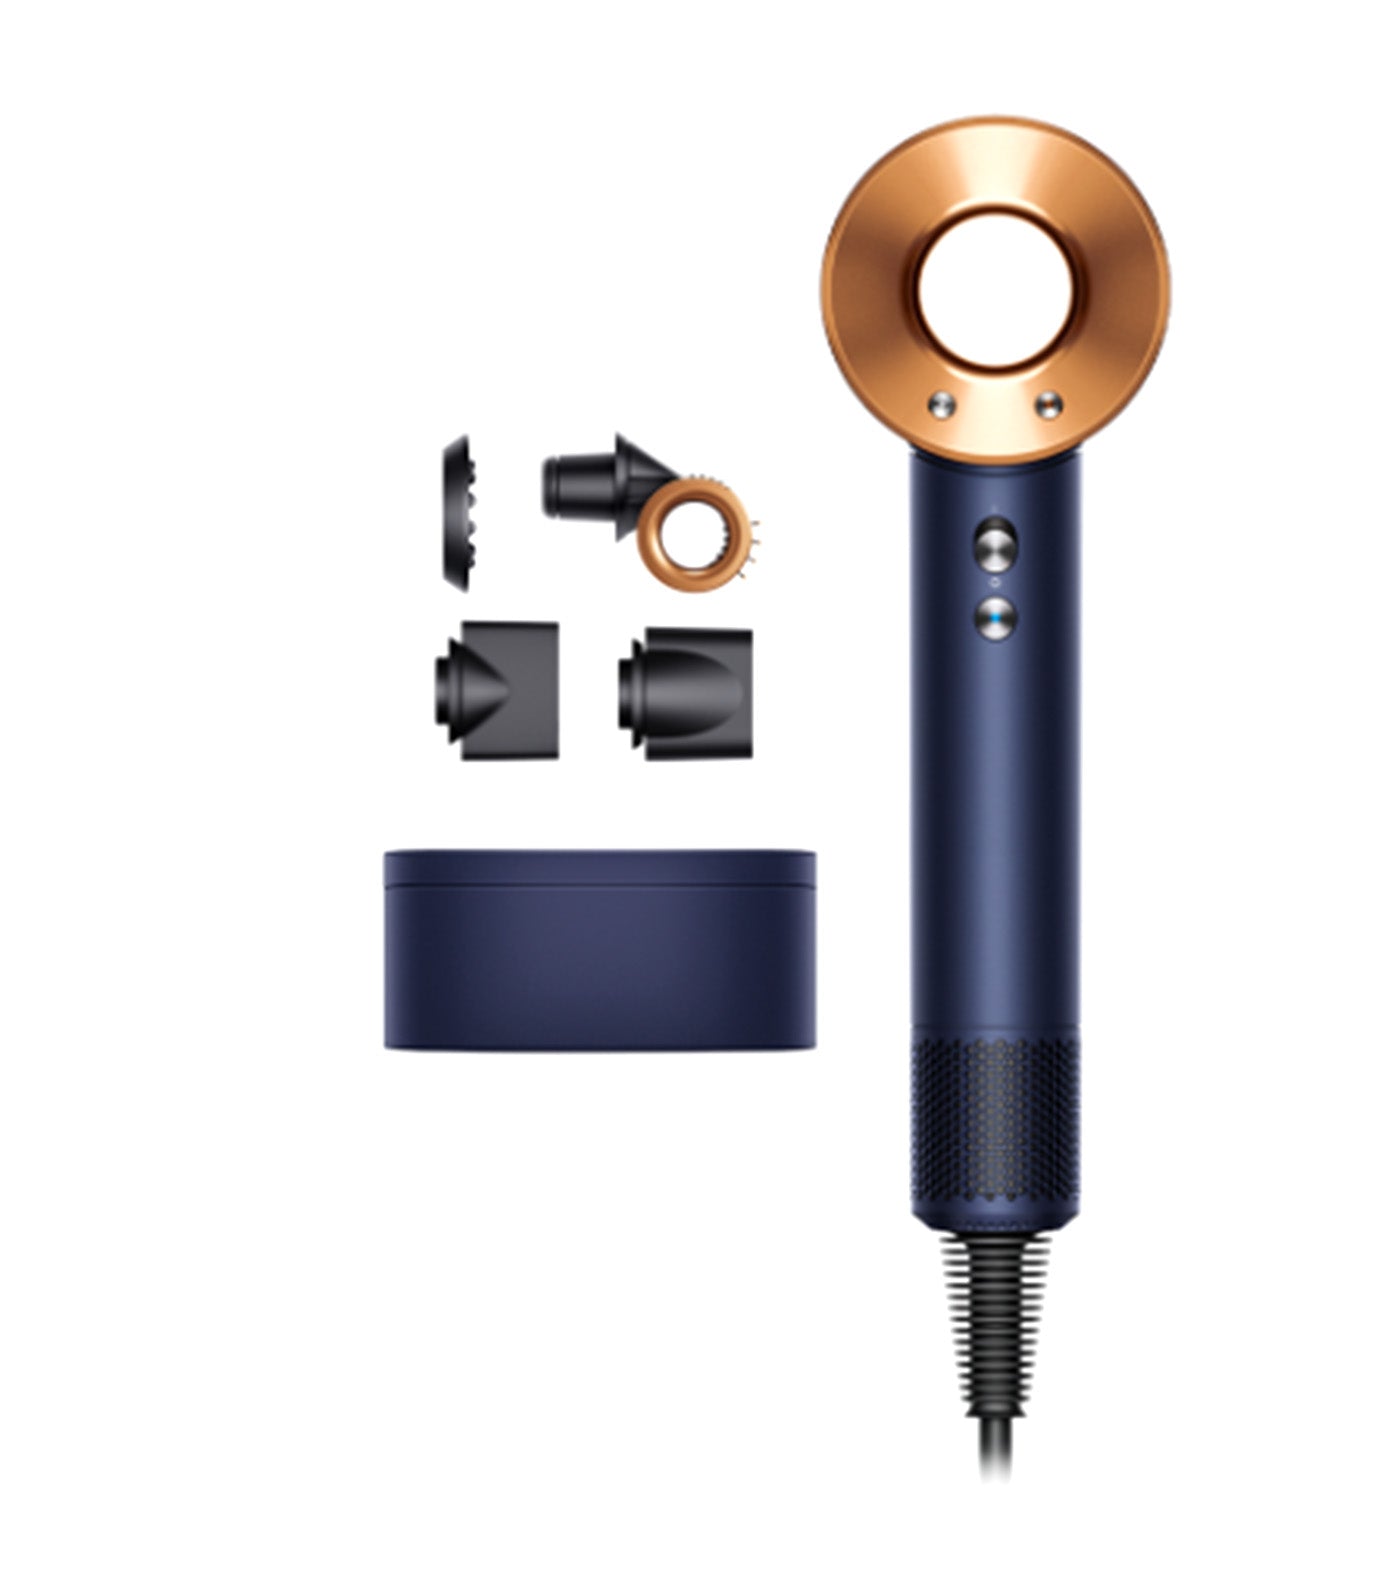 Supersonic™ Hair Dryer Prussian Blue/Bright Copper